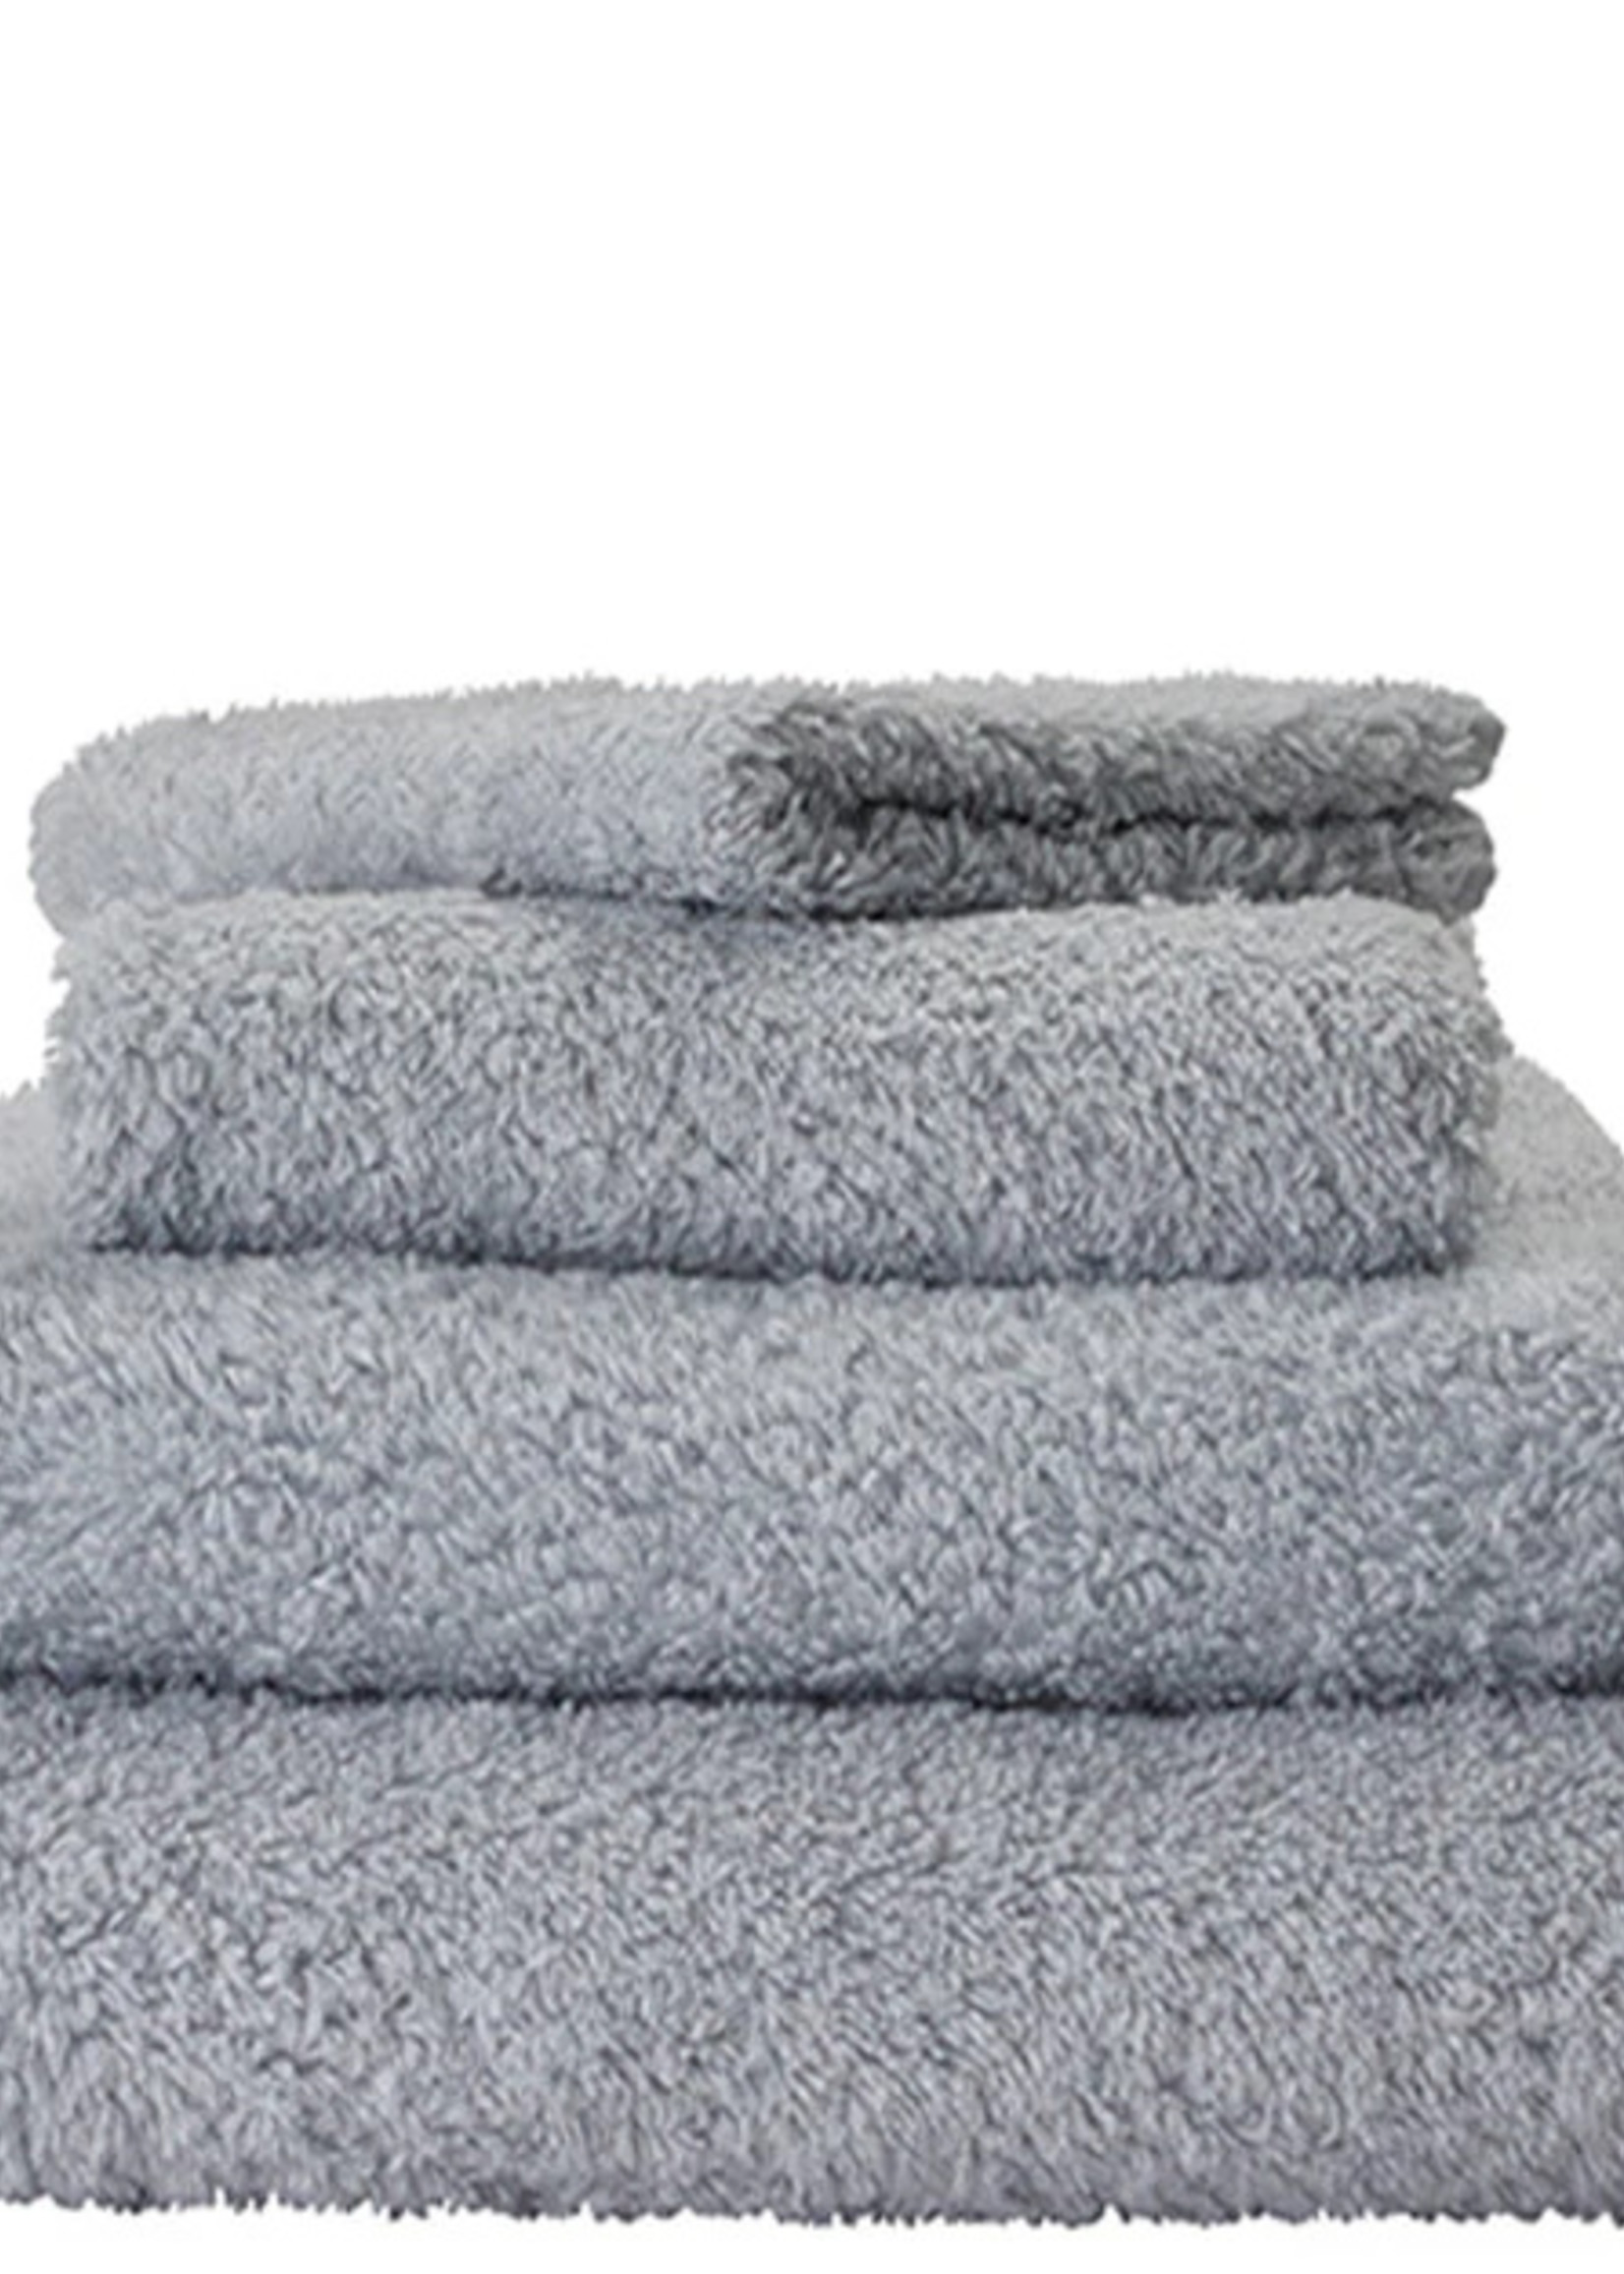 Abyss & Habidecor Super Pile Perle Towels